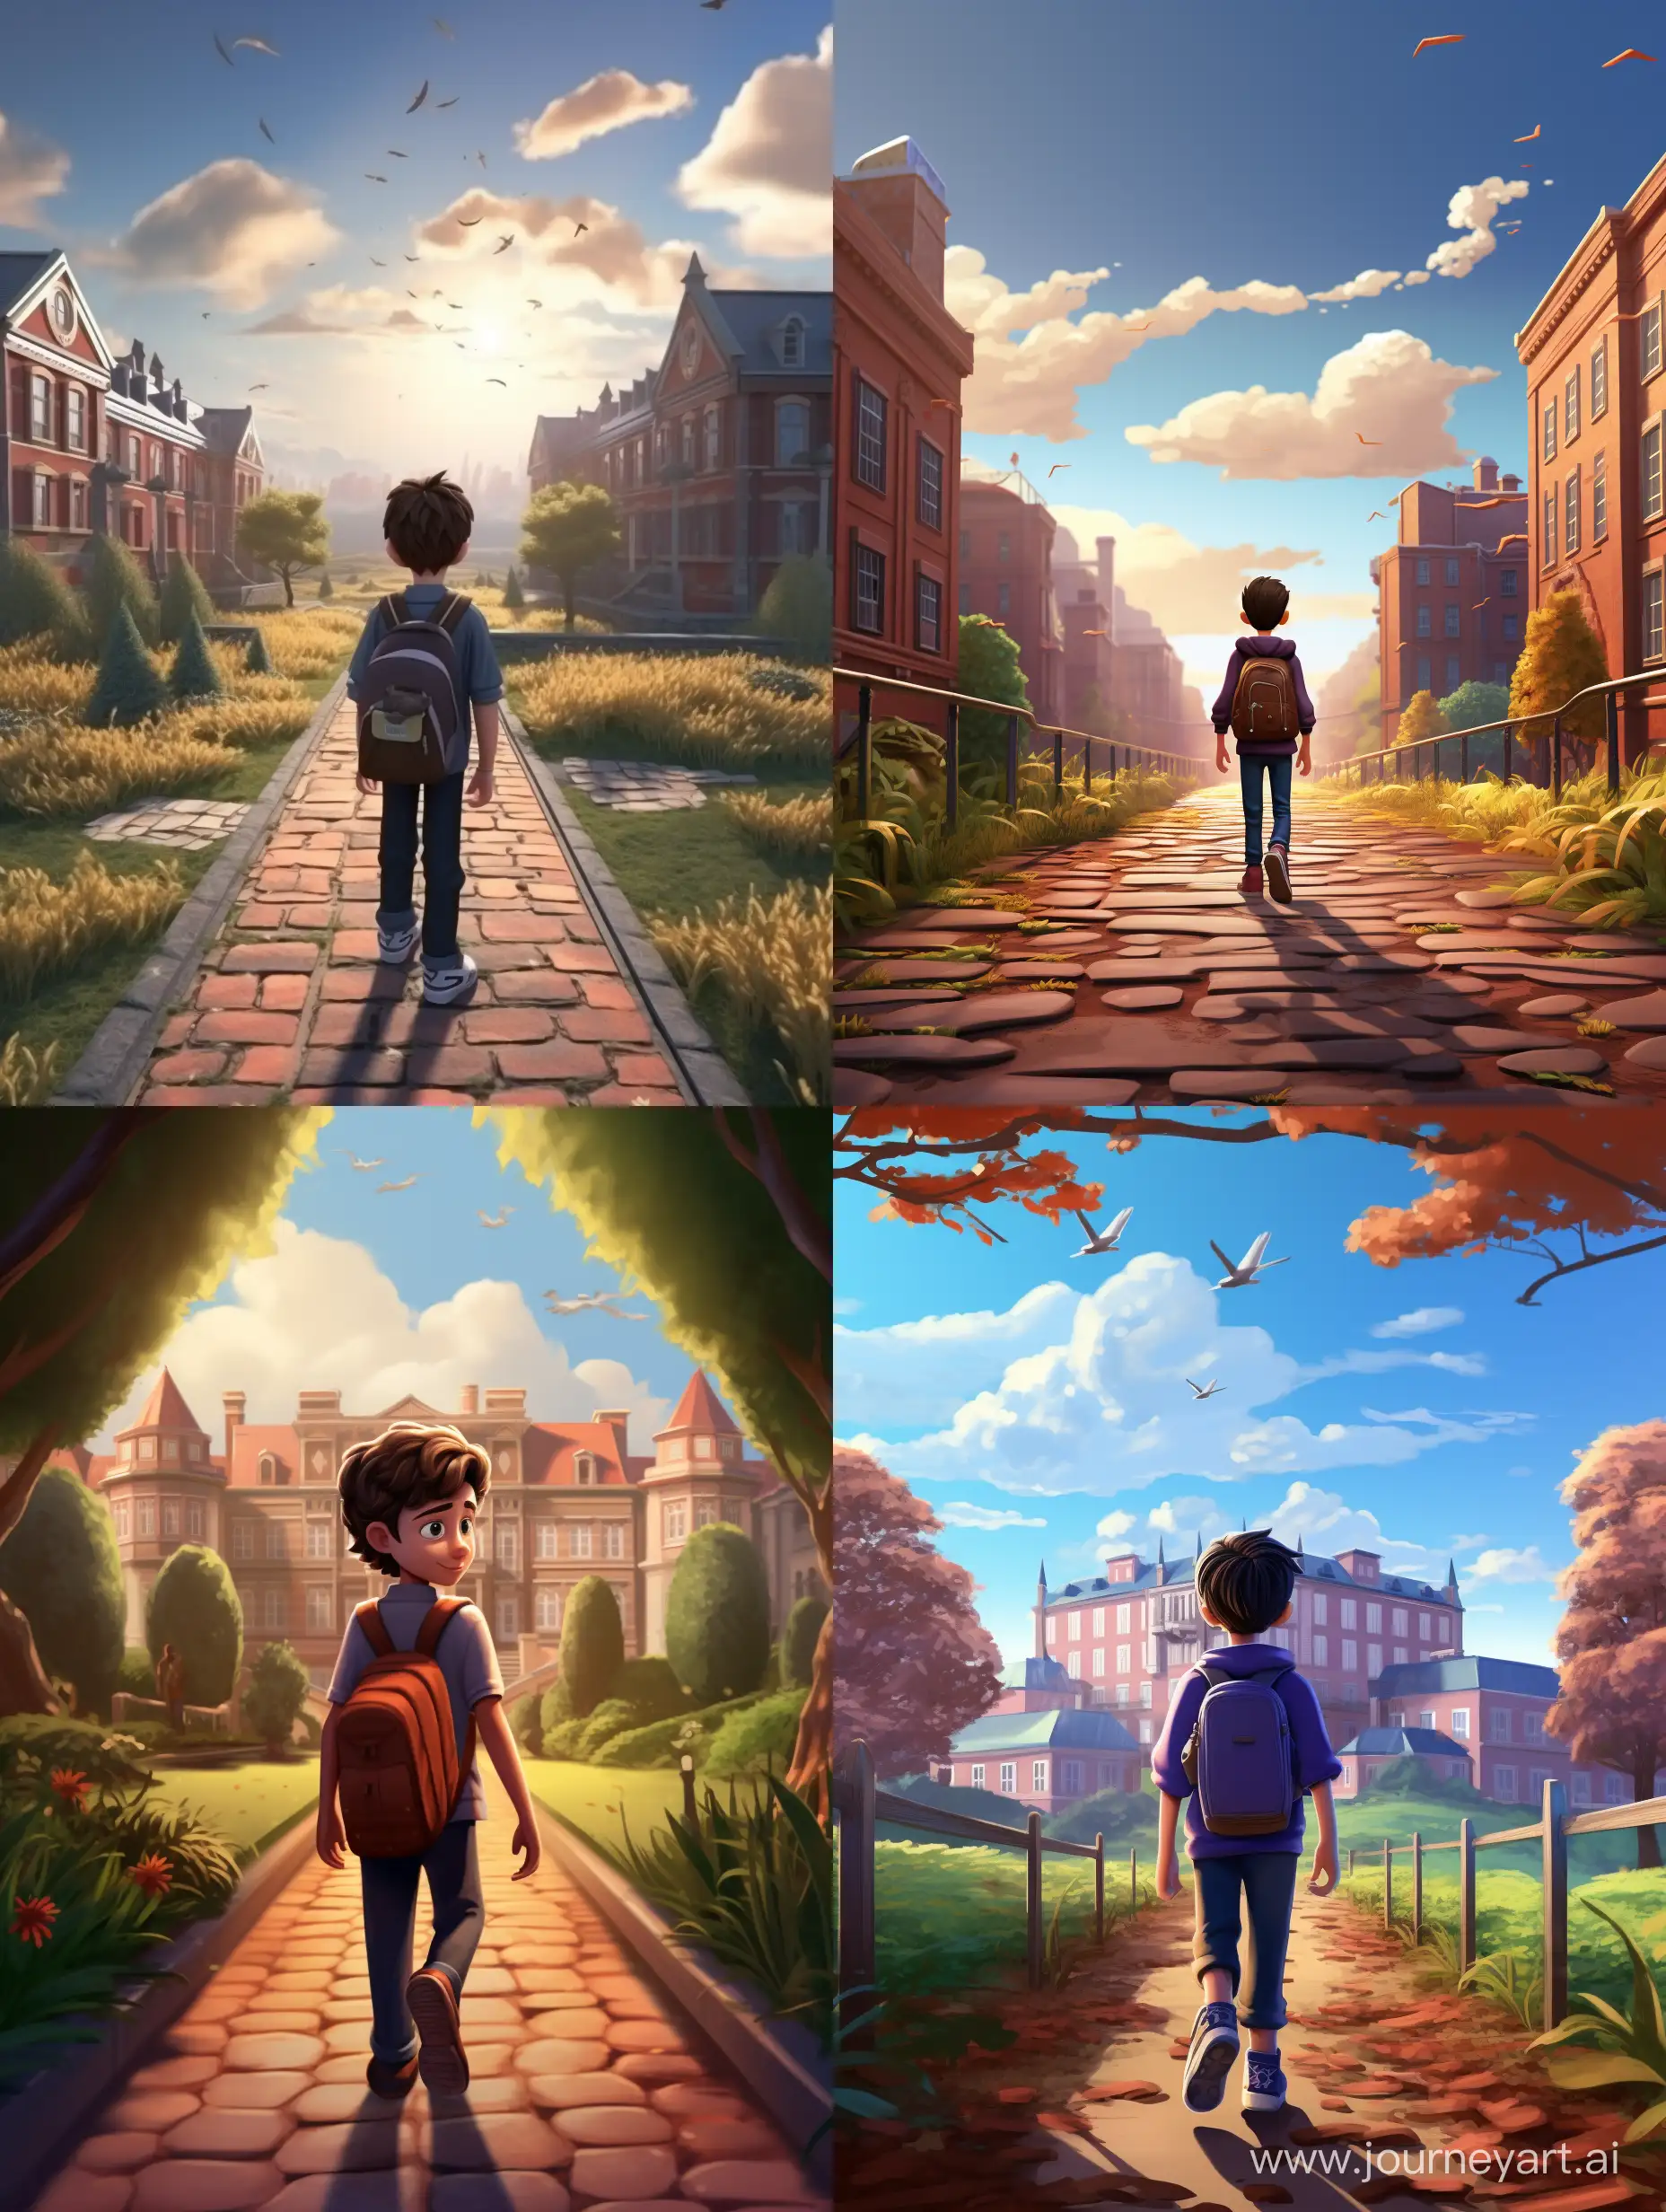 Boy-Walking-Along-Path-with-School-in-Background-Pixar-Style